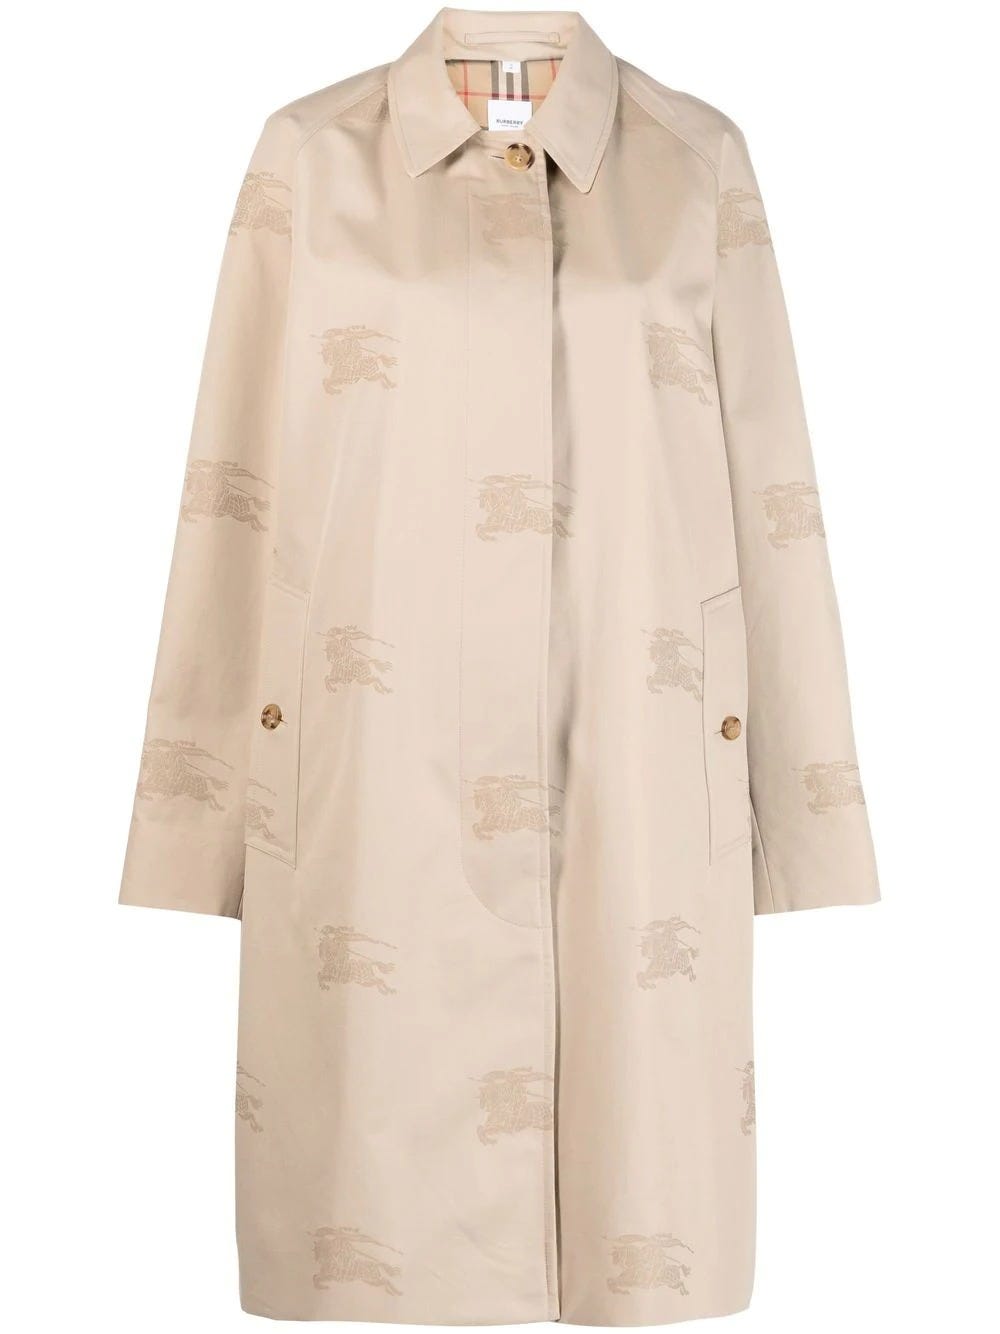 BURBERRY BEIGE TRENCH COAT WITH ALL-OVER LOGO